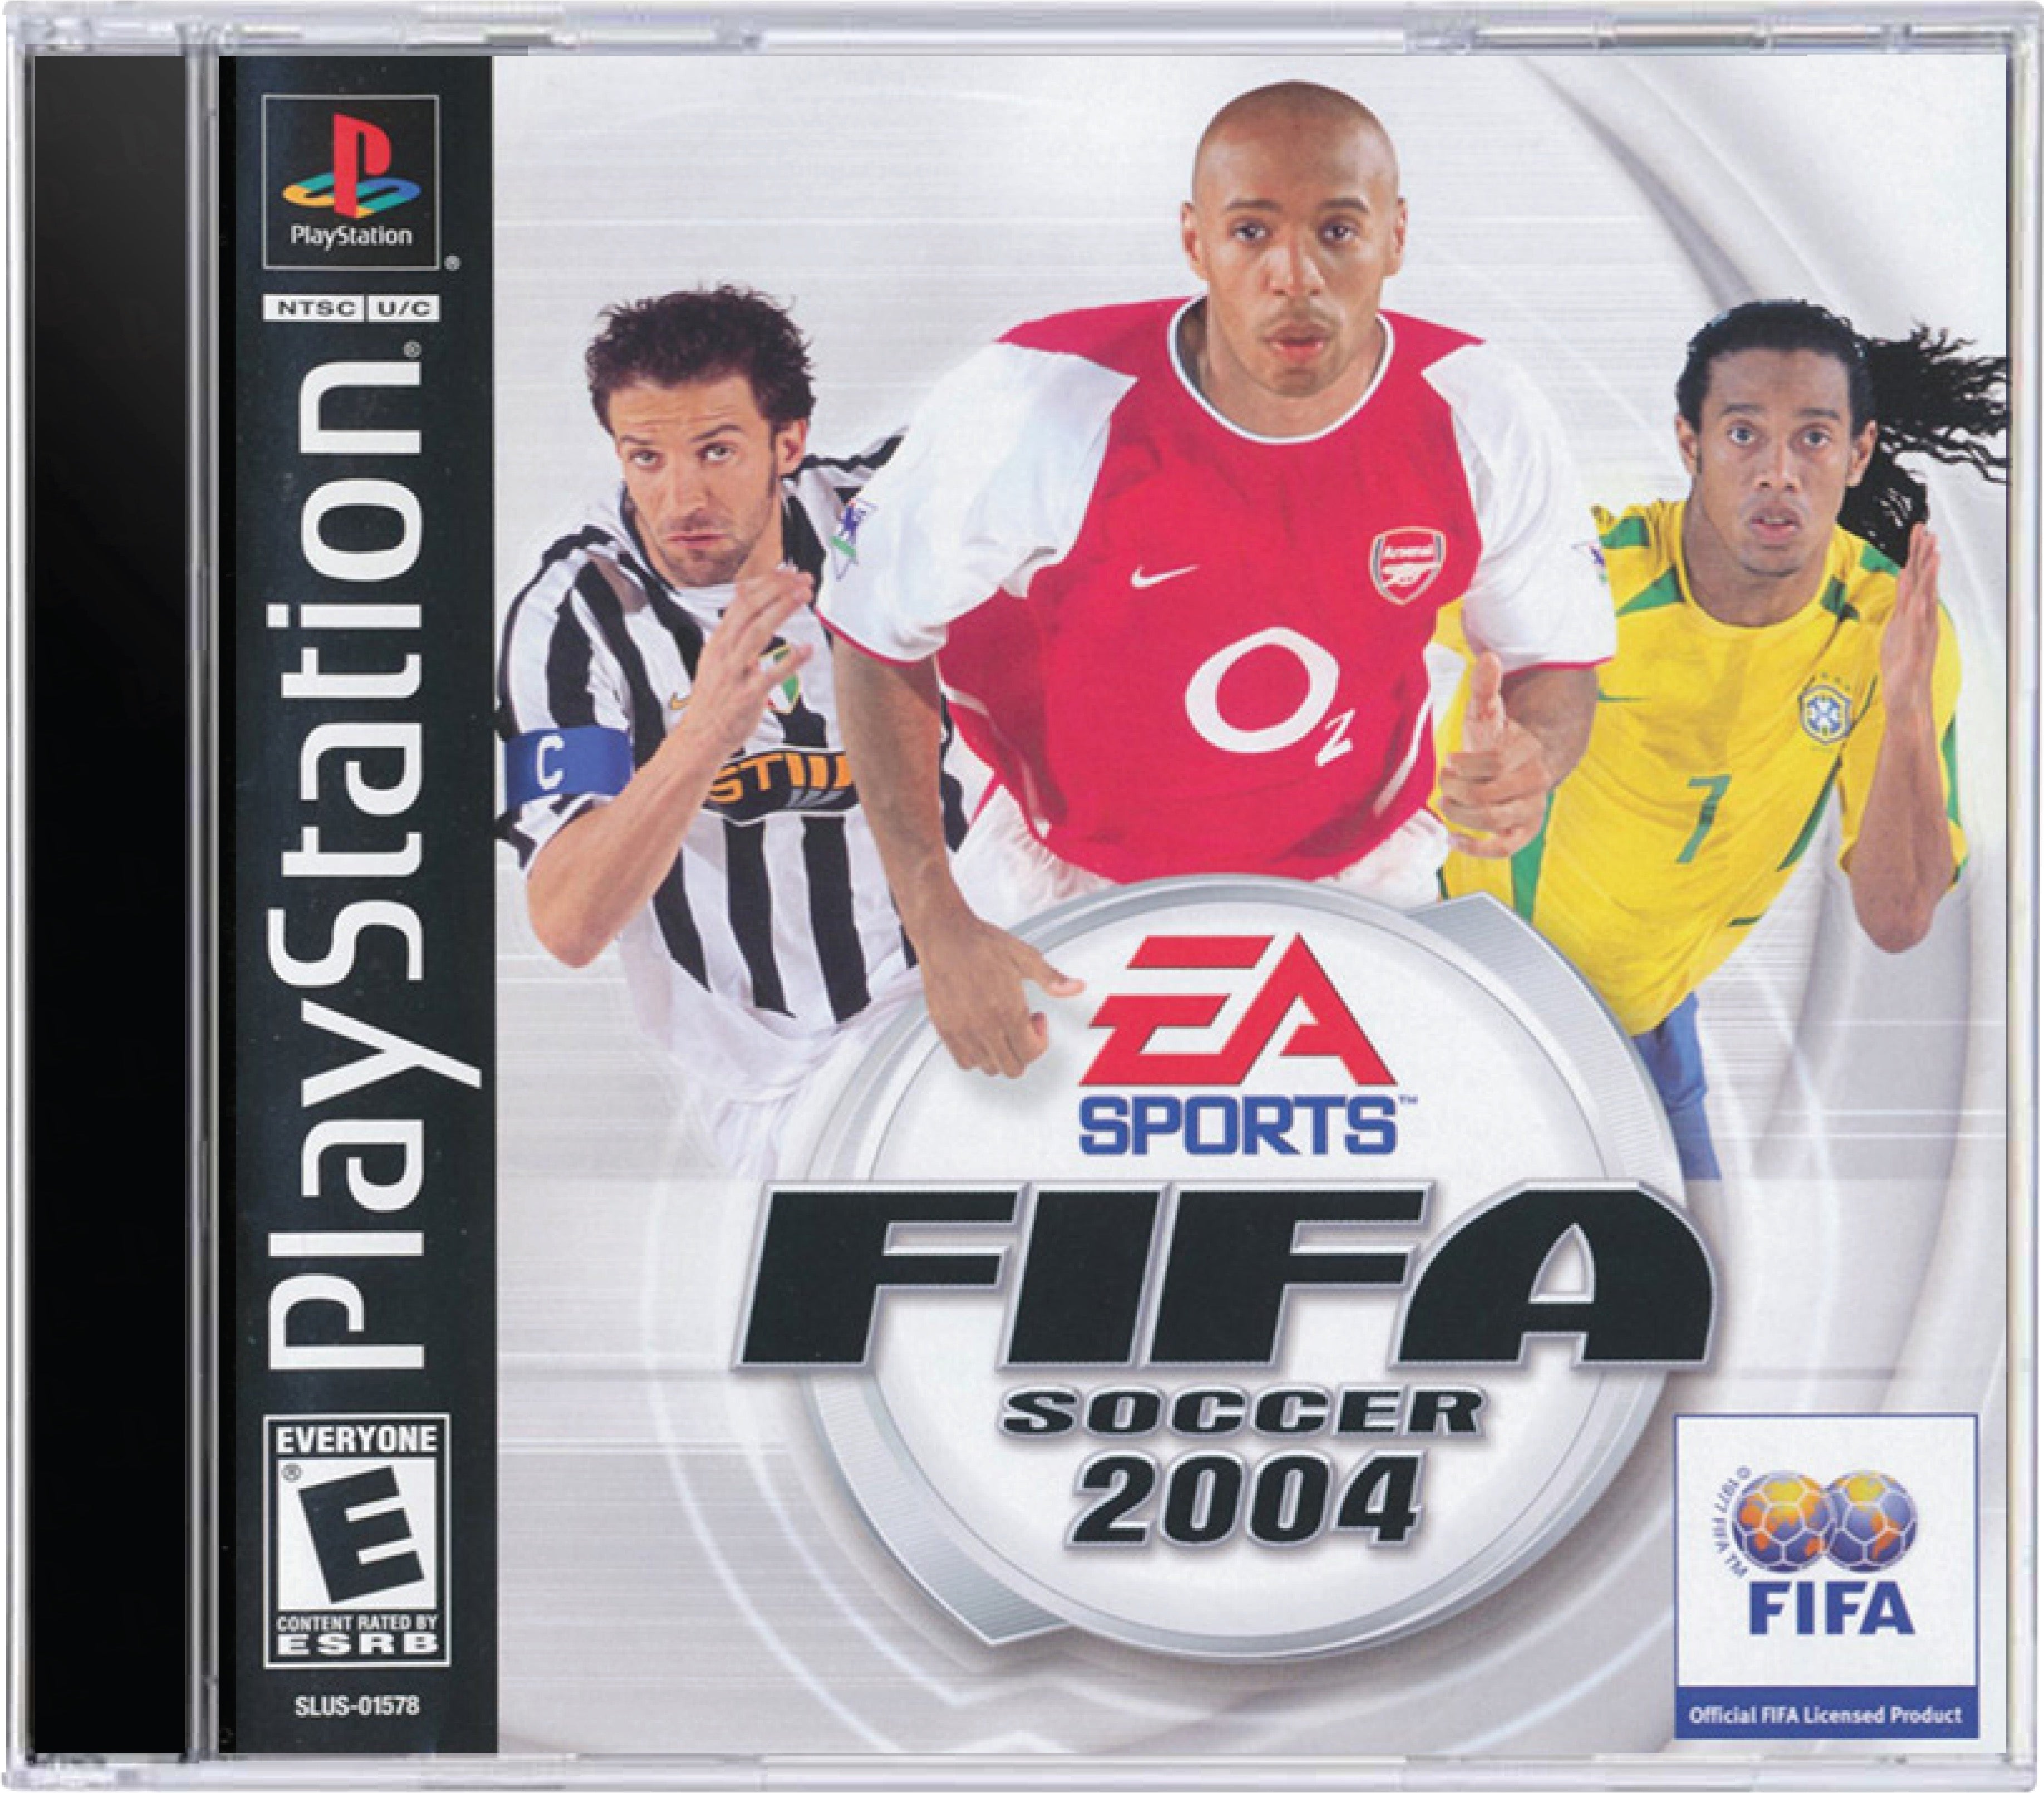 FIFA 2004 Cover Art and Product Photo